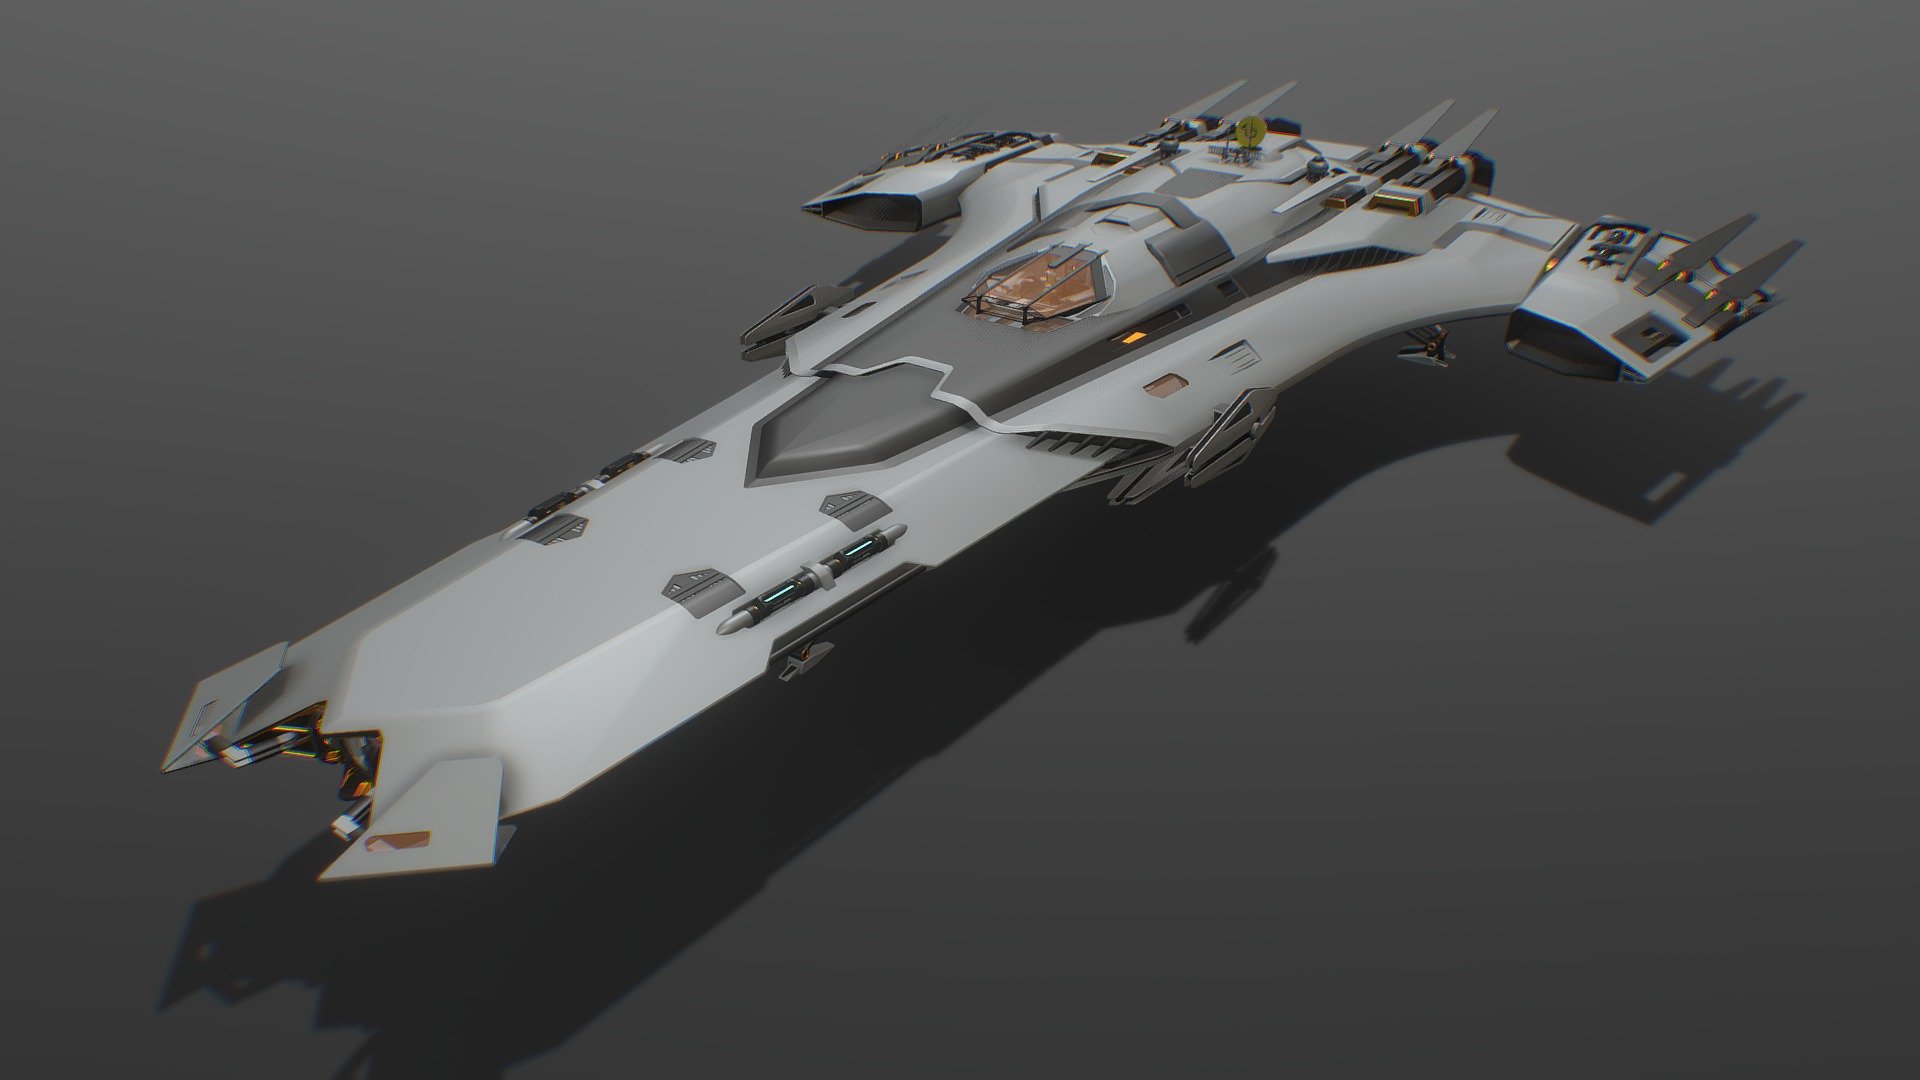 A longe range cruiser as part of the Knights of the Swan. Its Commanded by Captain Lohen and its crew of 20. Its Quark Gluon cannons and Antiproton engines makes it a fast and hard hitting opponent to any foe. The Interior is modeled but its a work in progress as it takes a lot of work and time to flesh it out.

Here is an Artstation post with an interior layout blueprint. https://www.artstation.com/artwork/Peqm83 - The Meridian Saga With Modeled Interior - 3D model by ReiSakisaka (@reizetsubou) 3d model